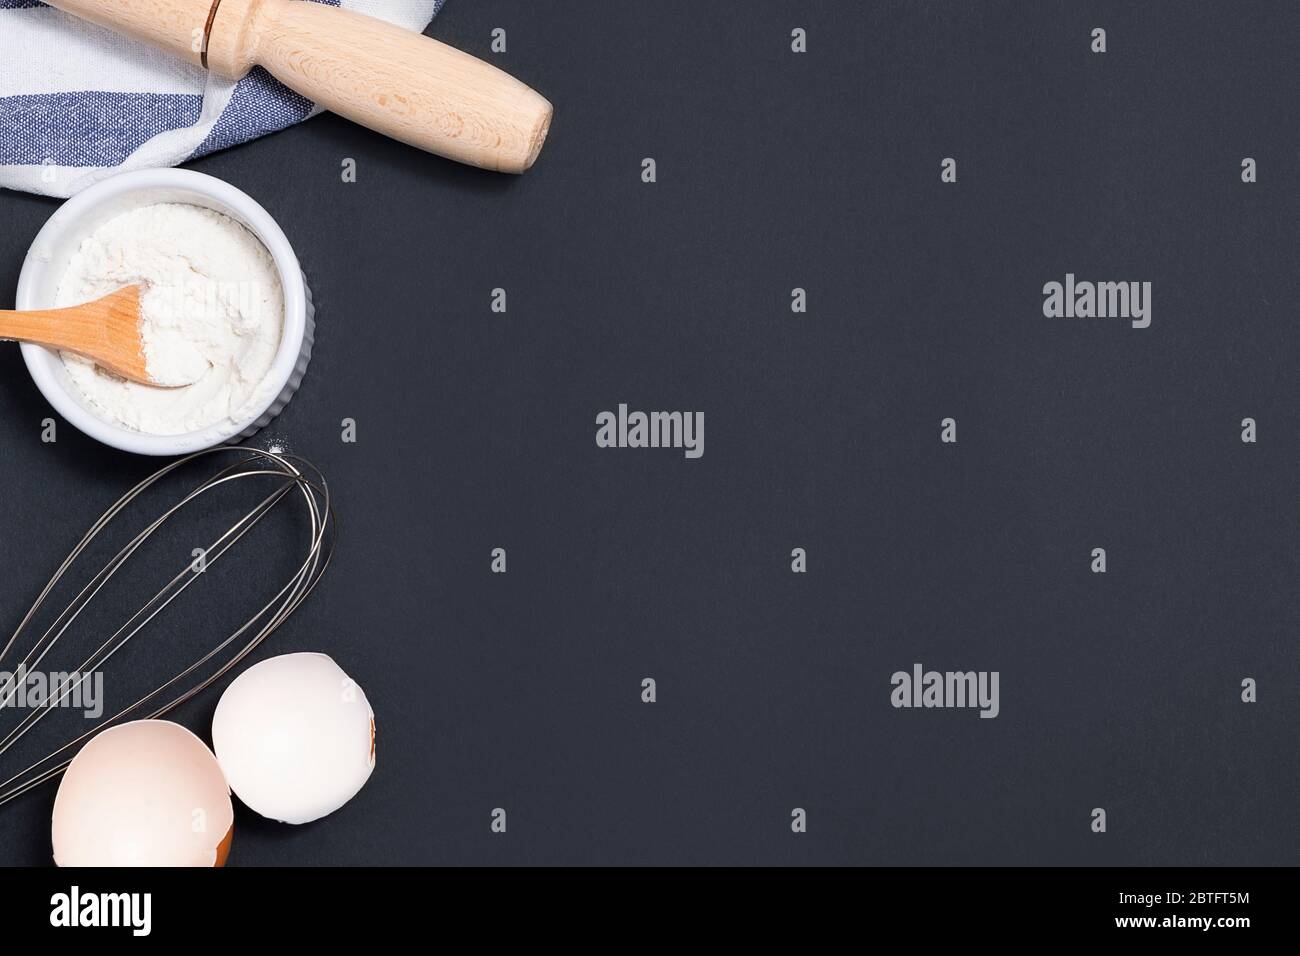 Top view of backing background with flour, rolling pin, eggshells, utility whisk with copy space Stock Photo